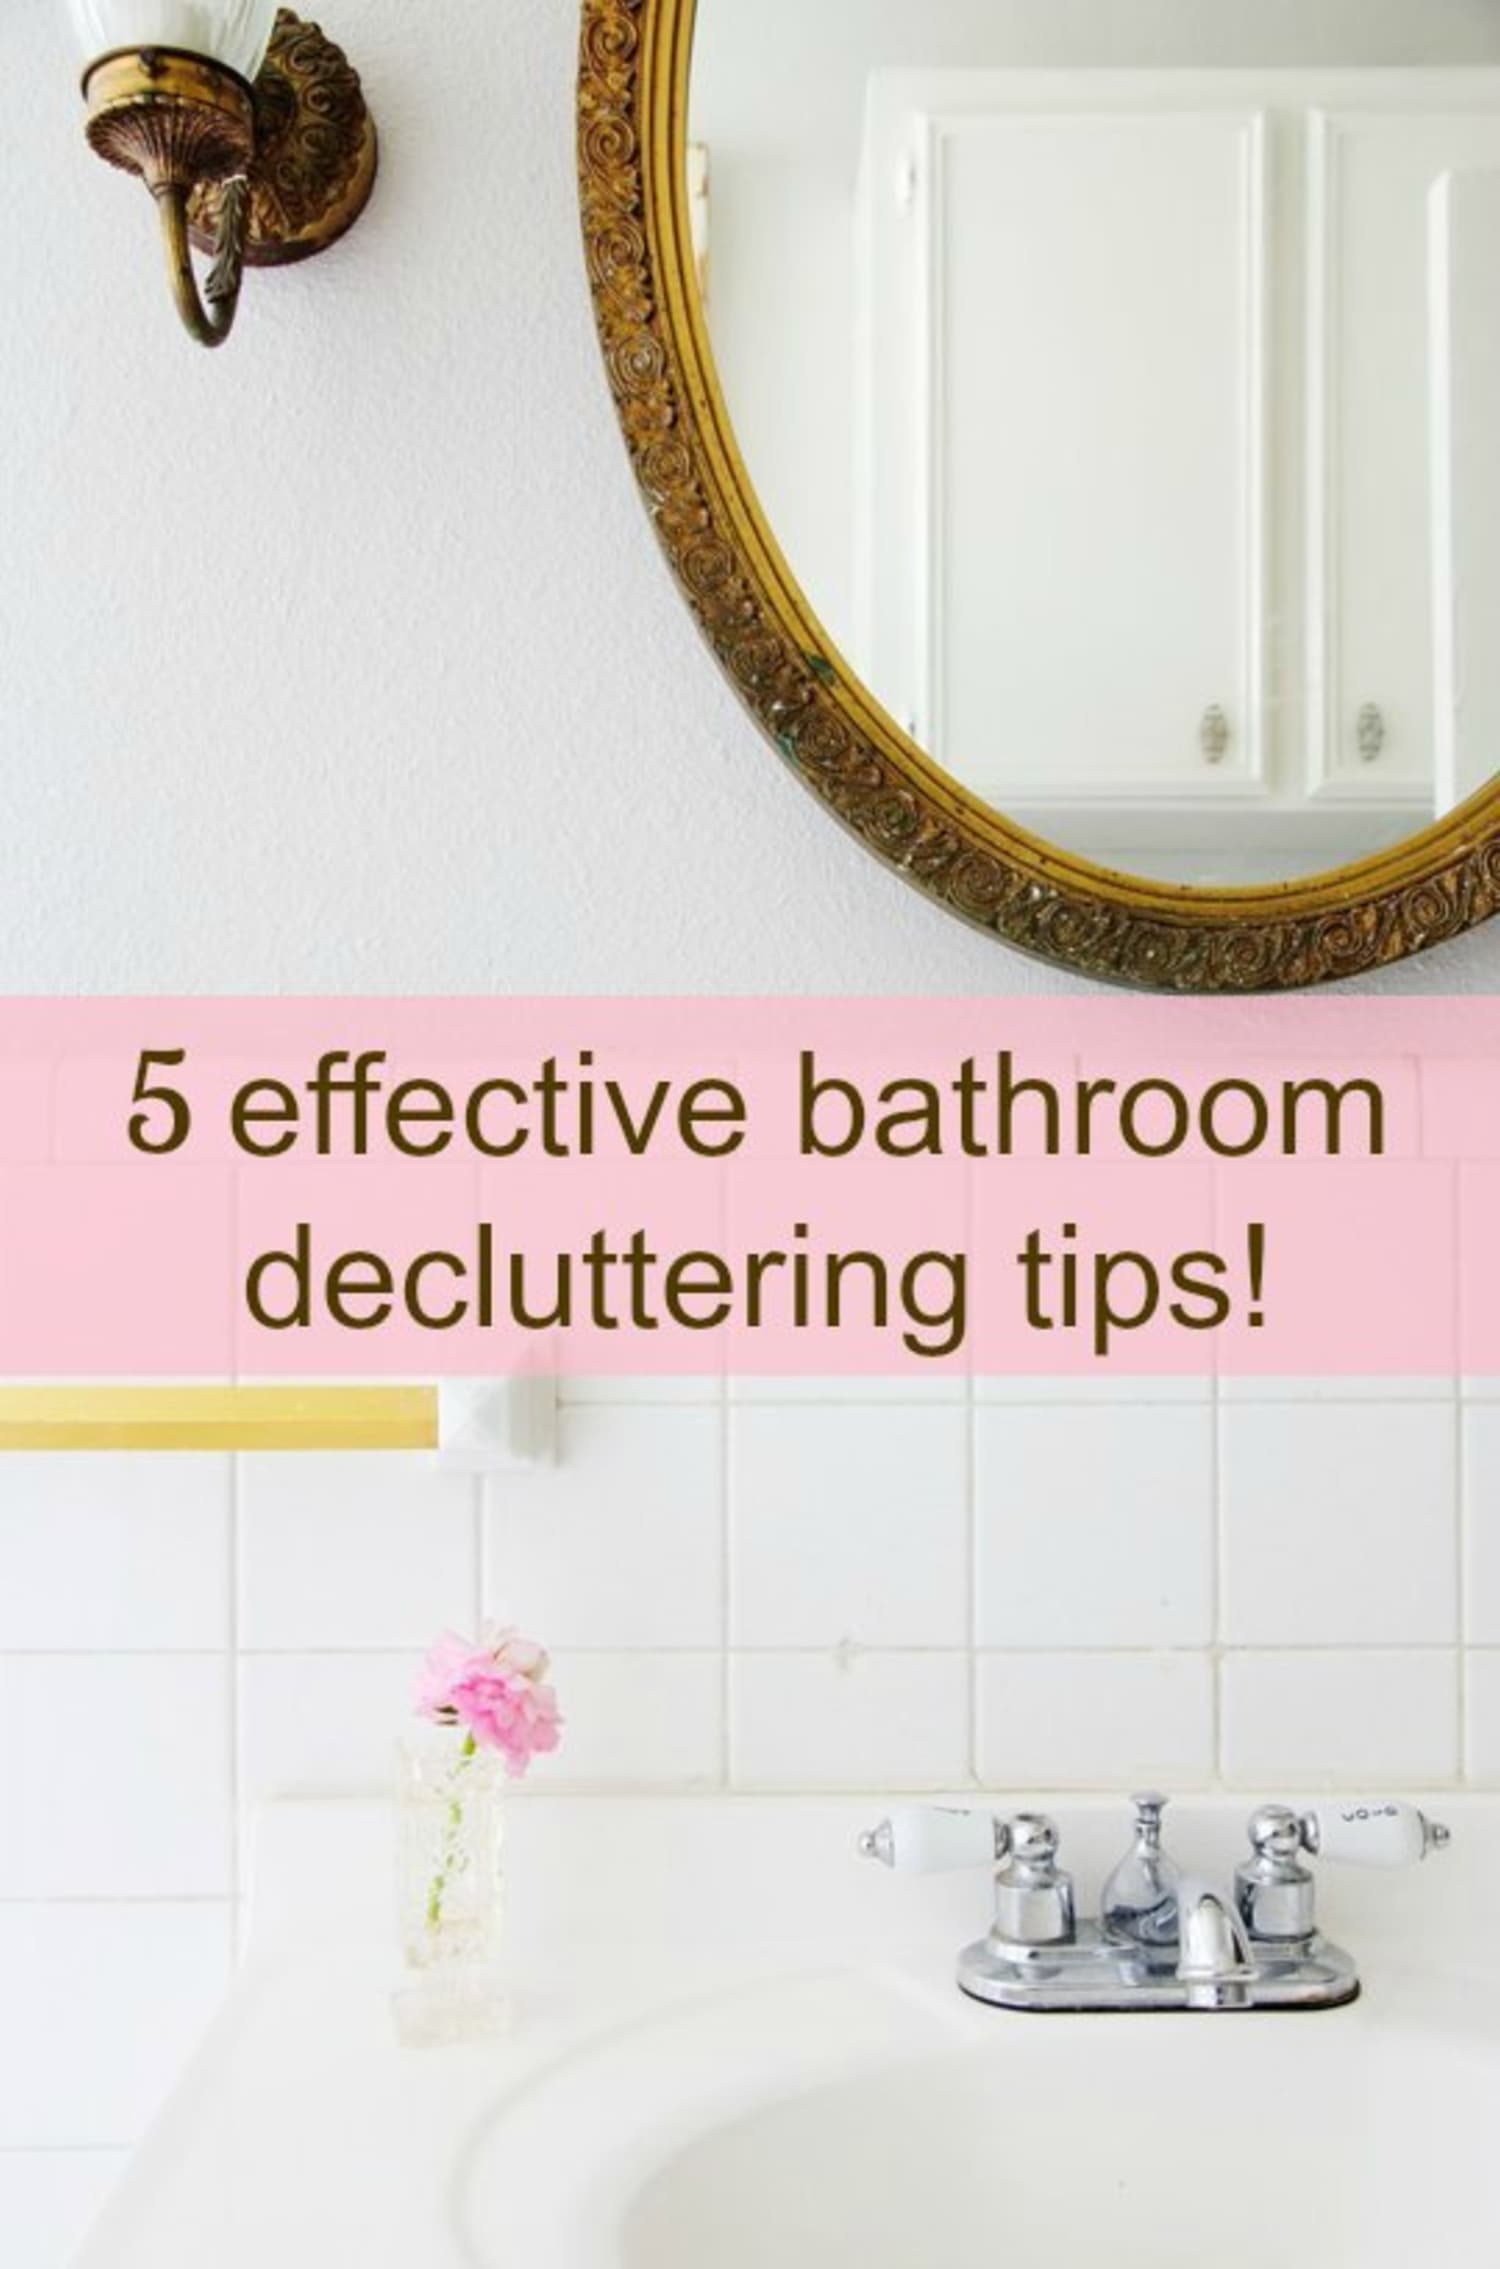 Small Bathroom Ideas: 5 Effective Decluttering Tips for a Tidier Space